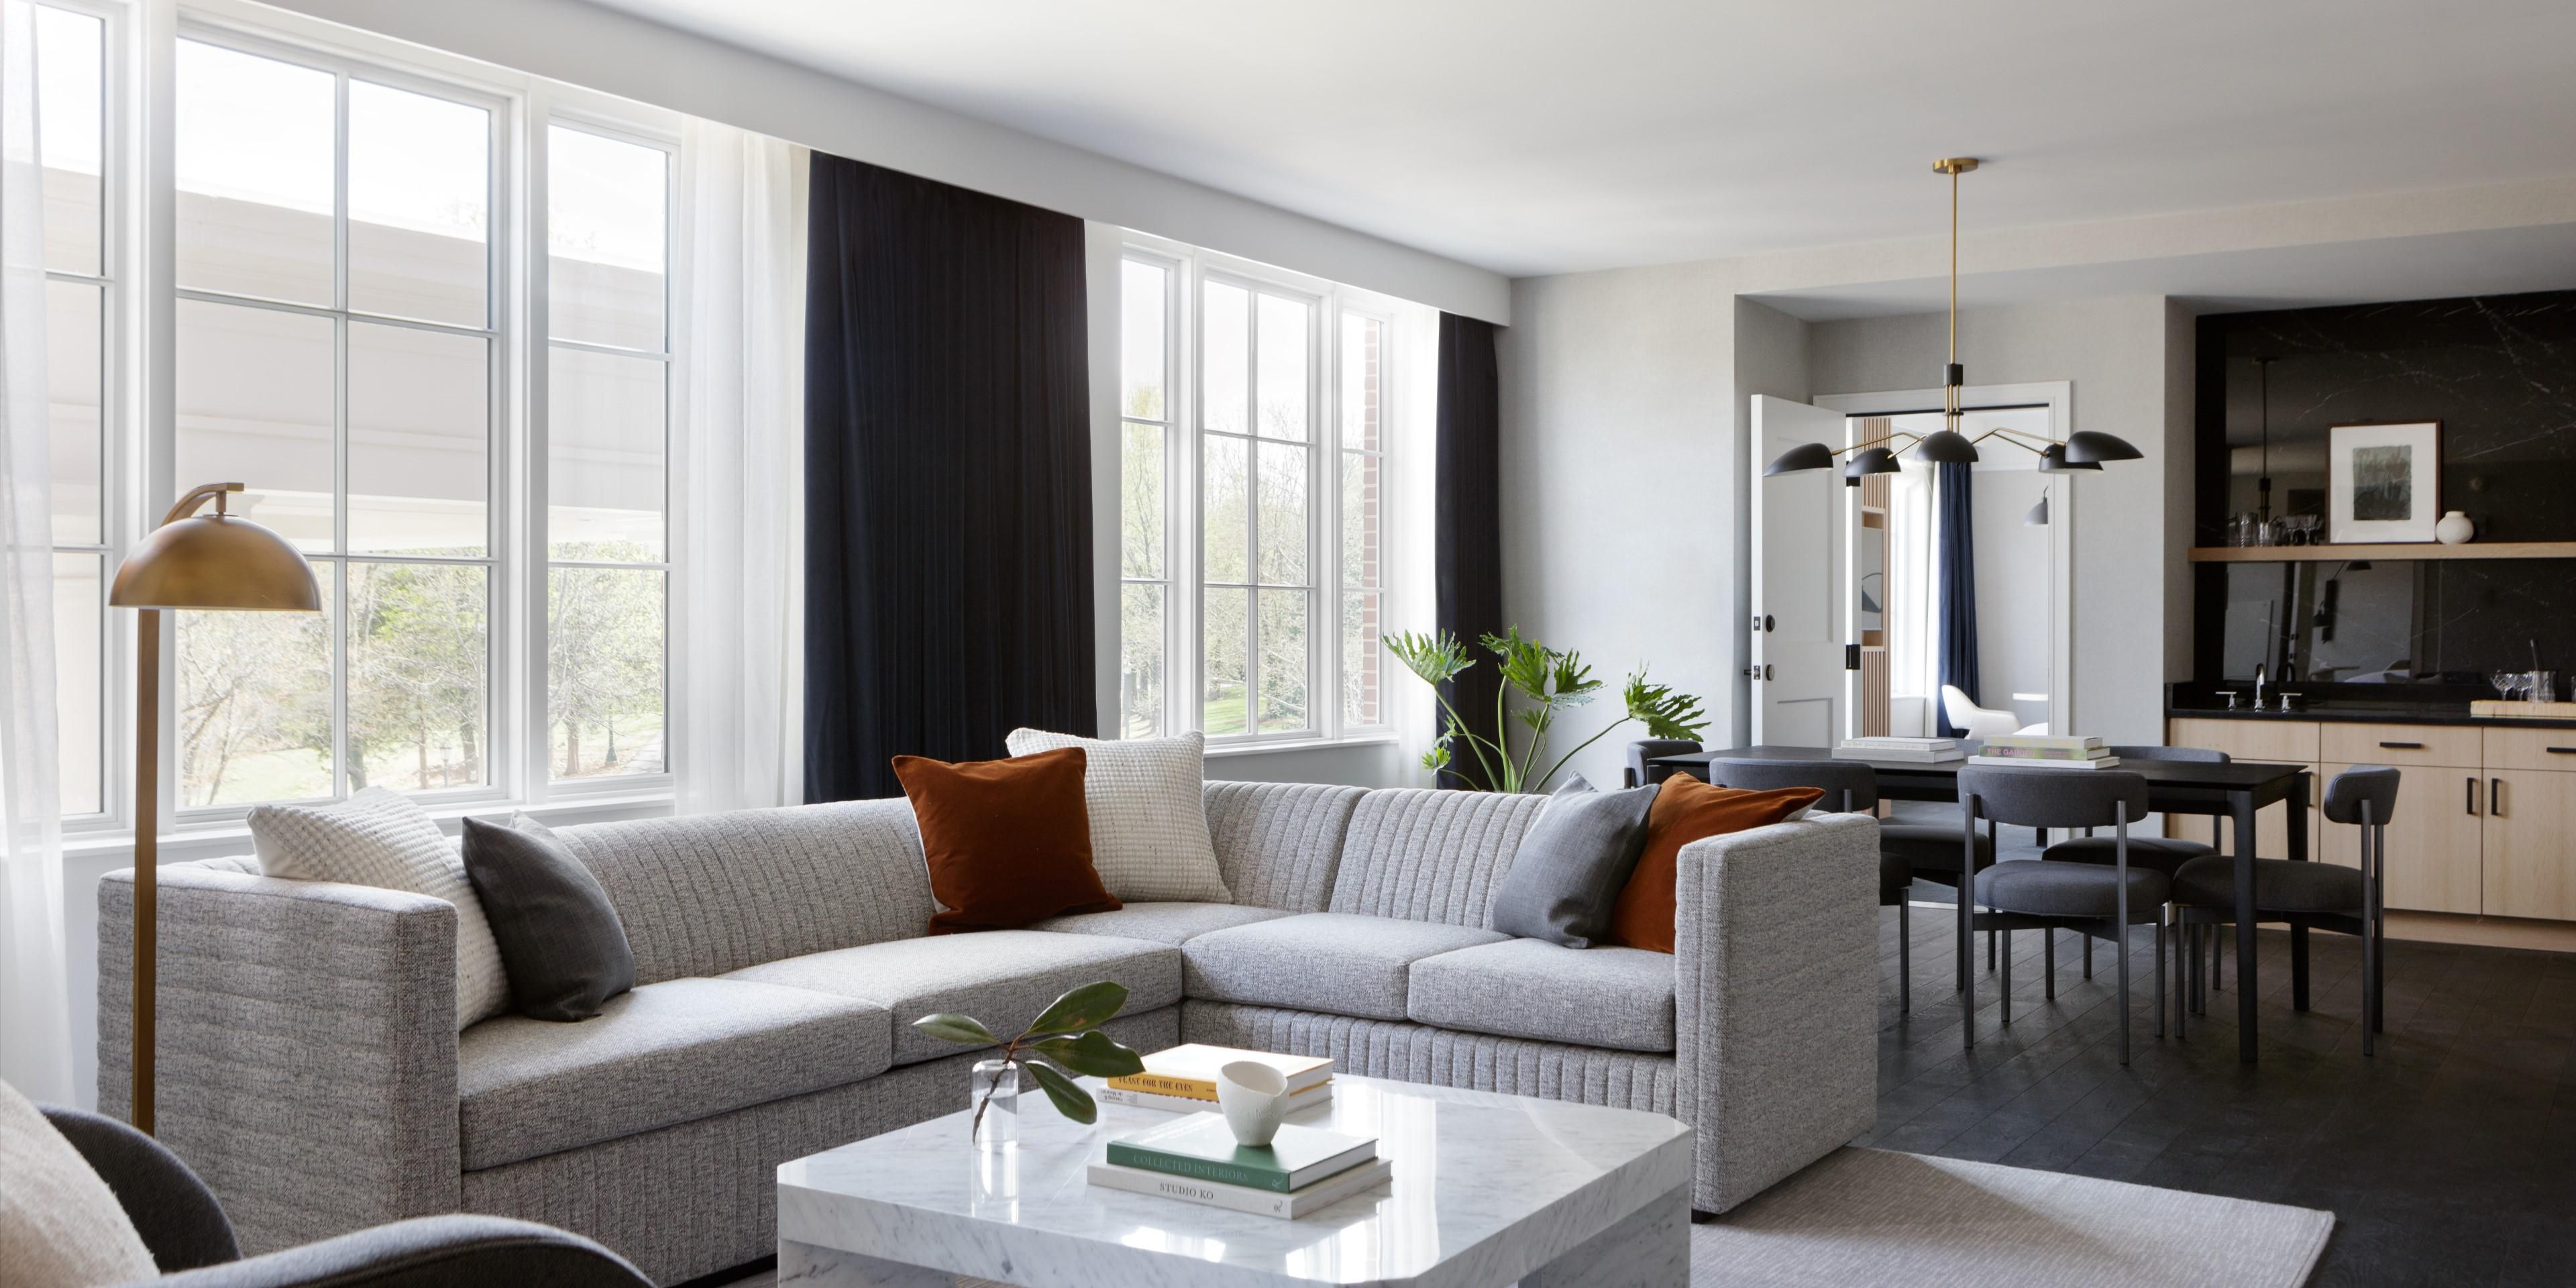 The Kimpton The Forum Hotel includes several specialty suites. These sophisticated and generously sized suites offer the perfect escape. Luxe furnishings, high-end finishes and a soothing color palette create the ultimate retreat, even when you have to take care of business. 